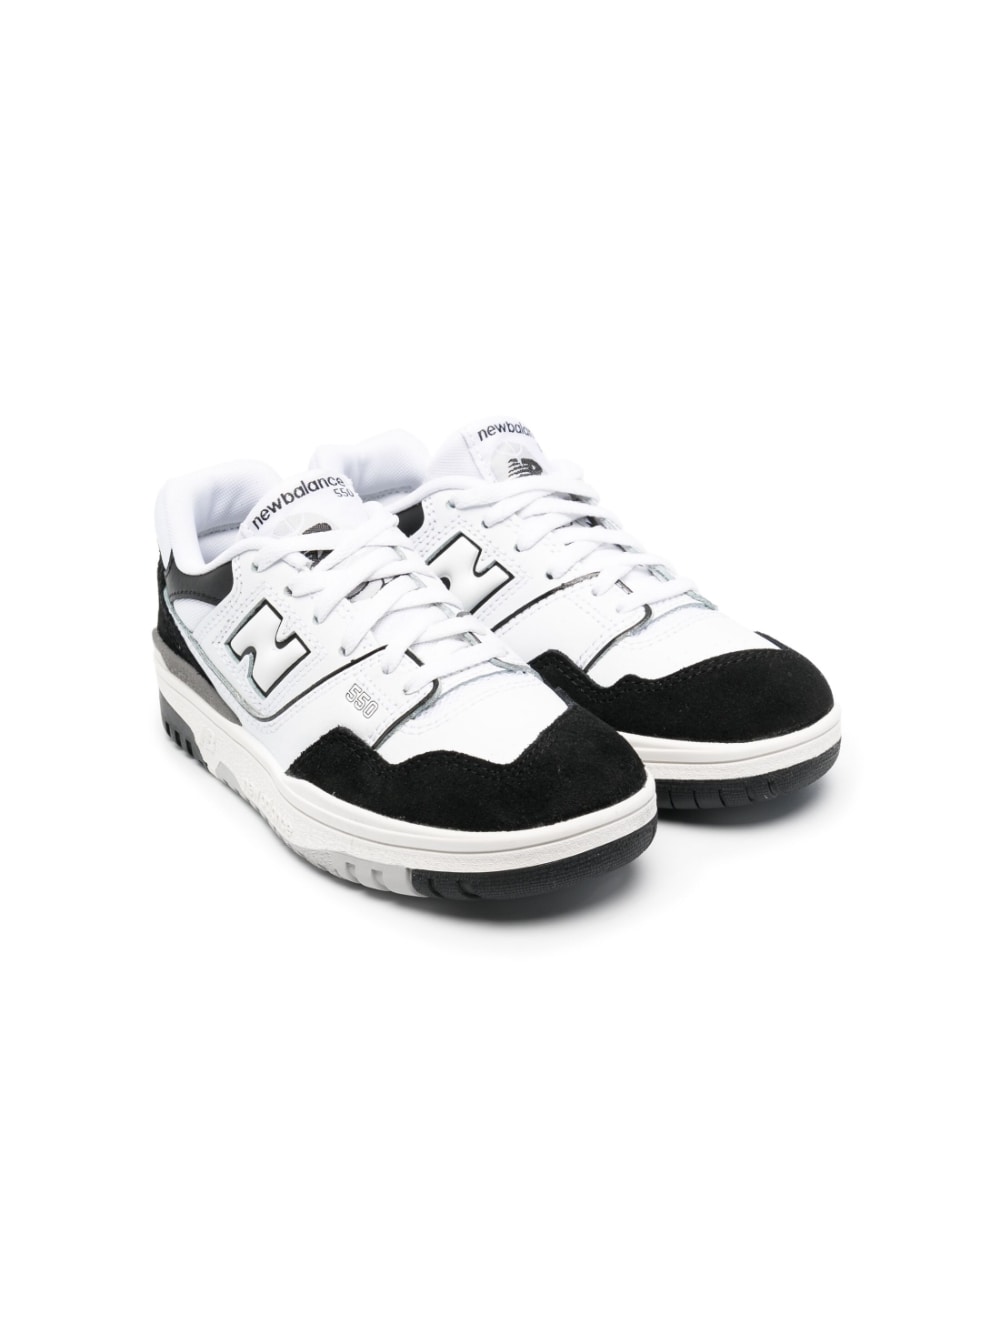 New Balance Kids 550 Bungee lace-up sneakers - White